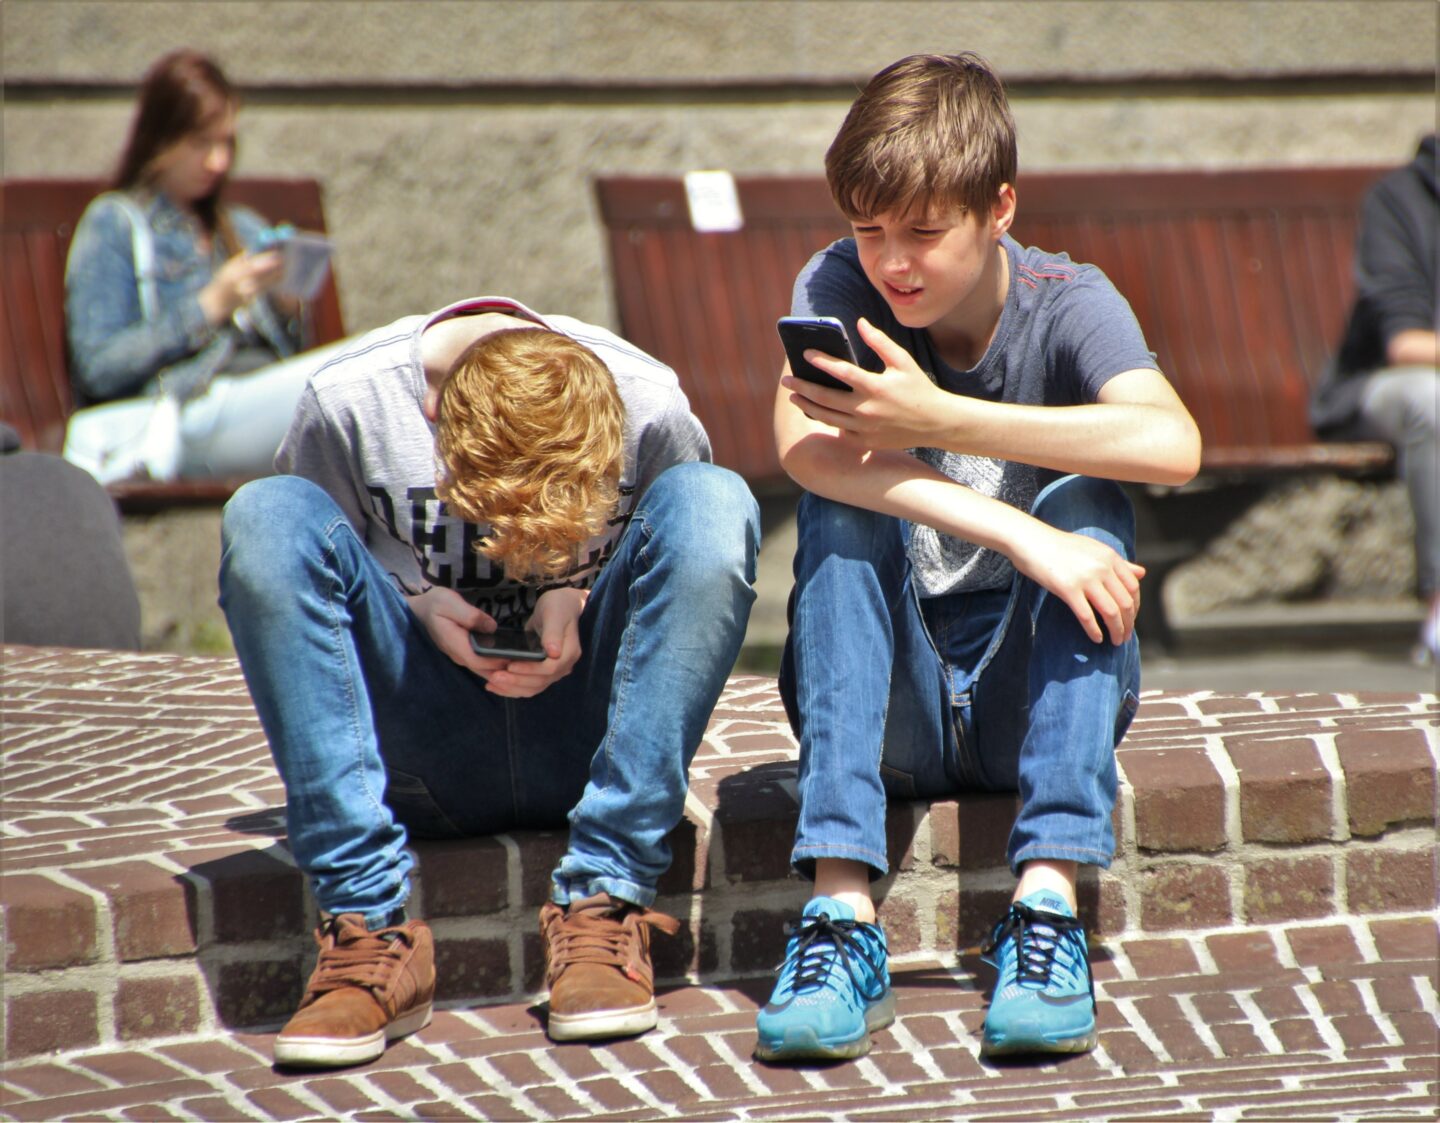 Two children sitting next to one another outside are fixated on their phones